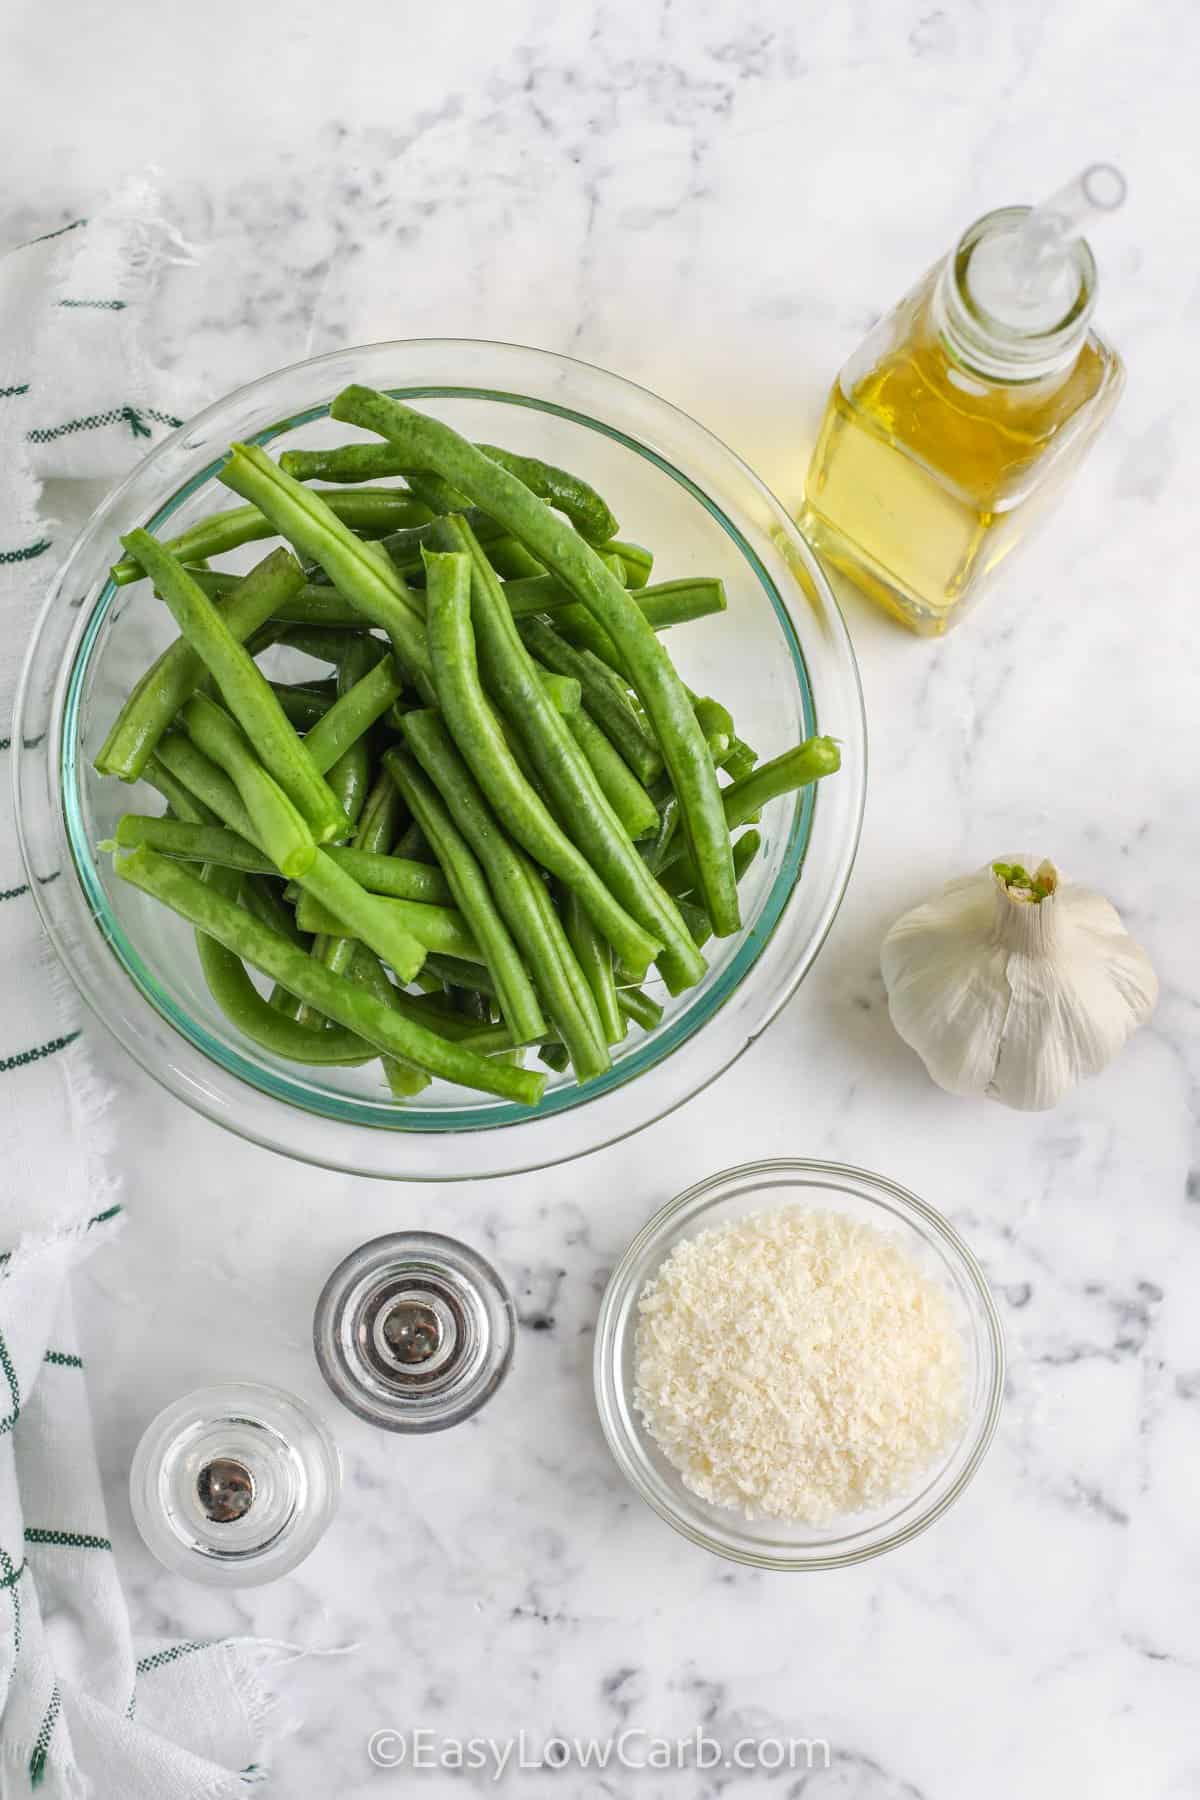 ingredients to make Roasted Green Beans